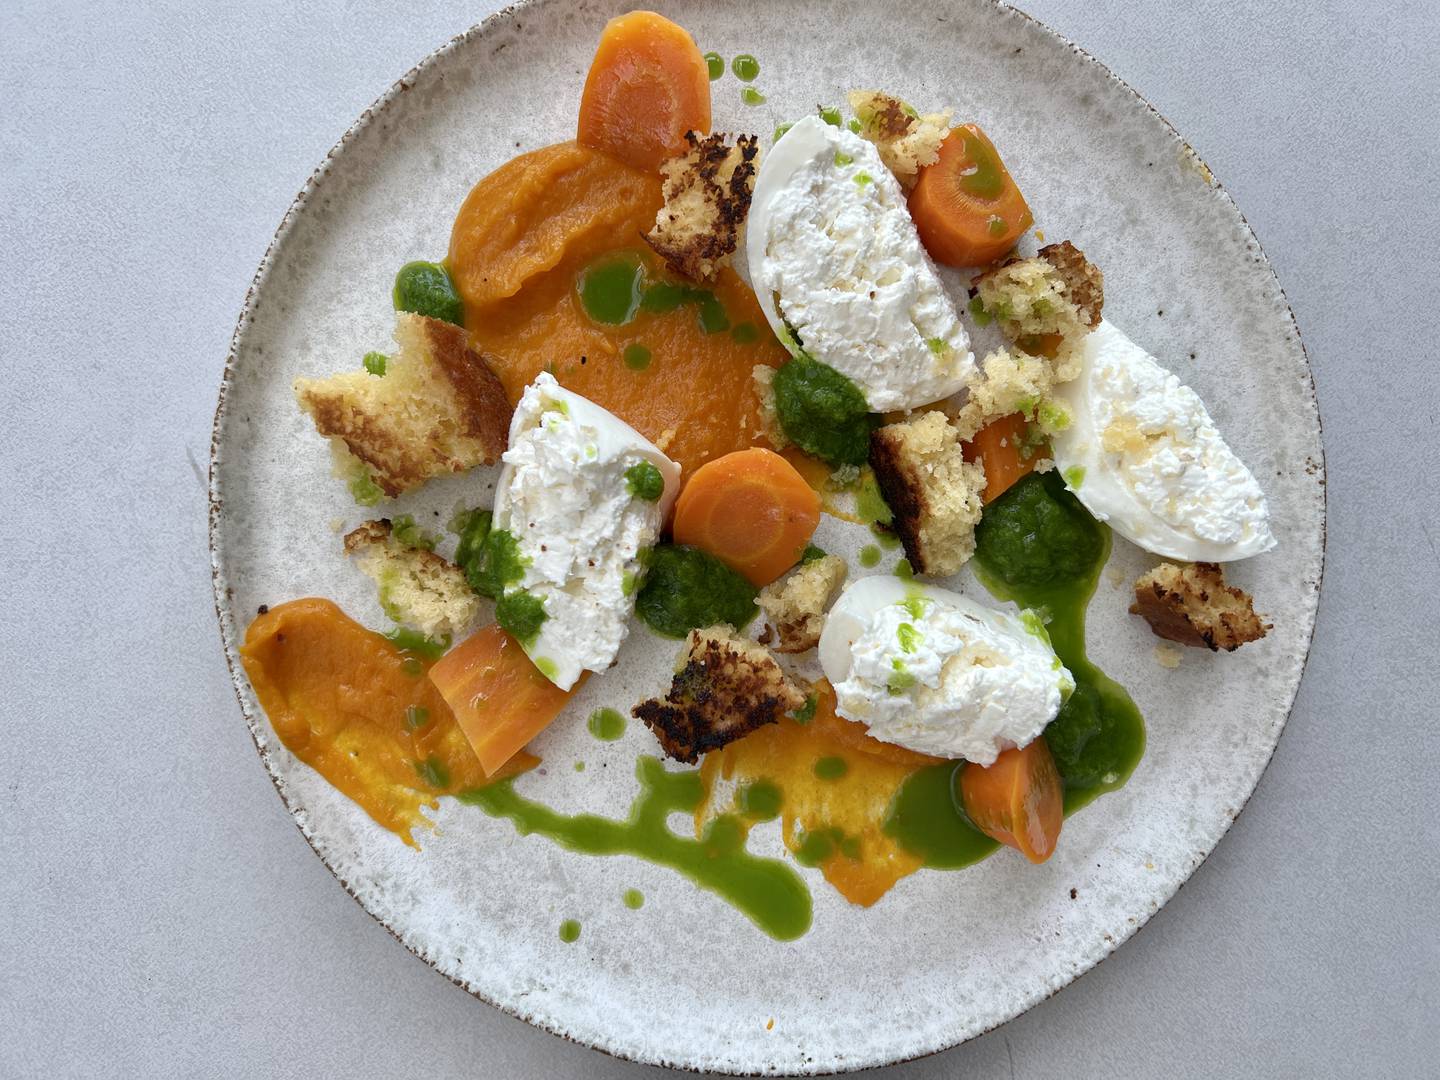 A carrot and burrata dish, made using carrot peel and carrot top greens, by chef Kelvin Leung.